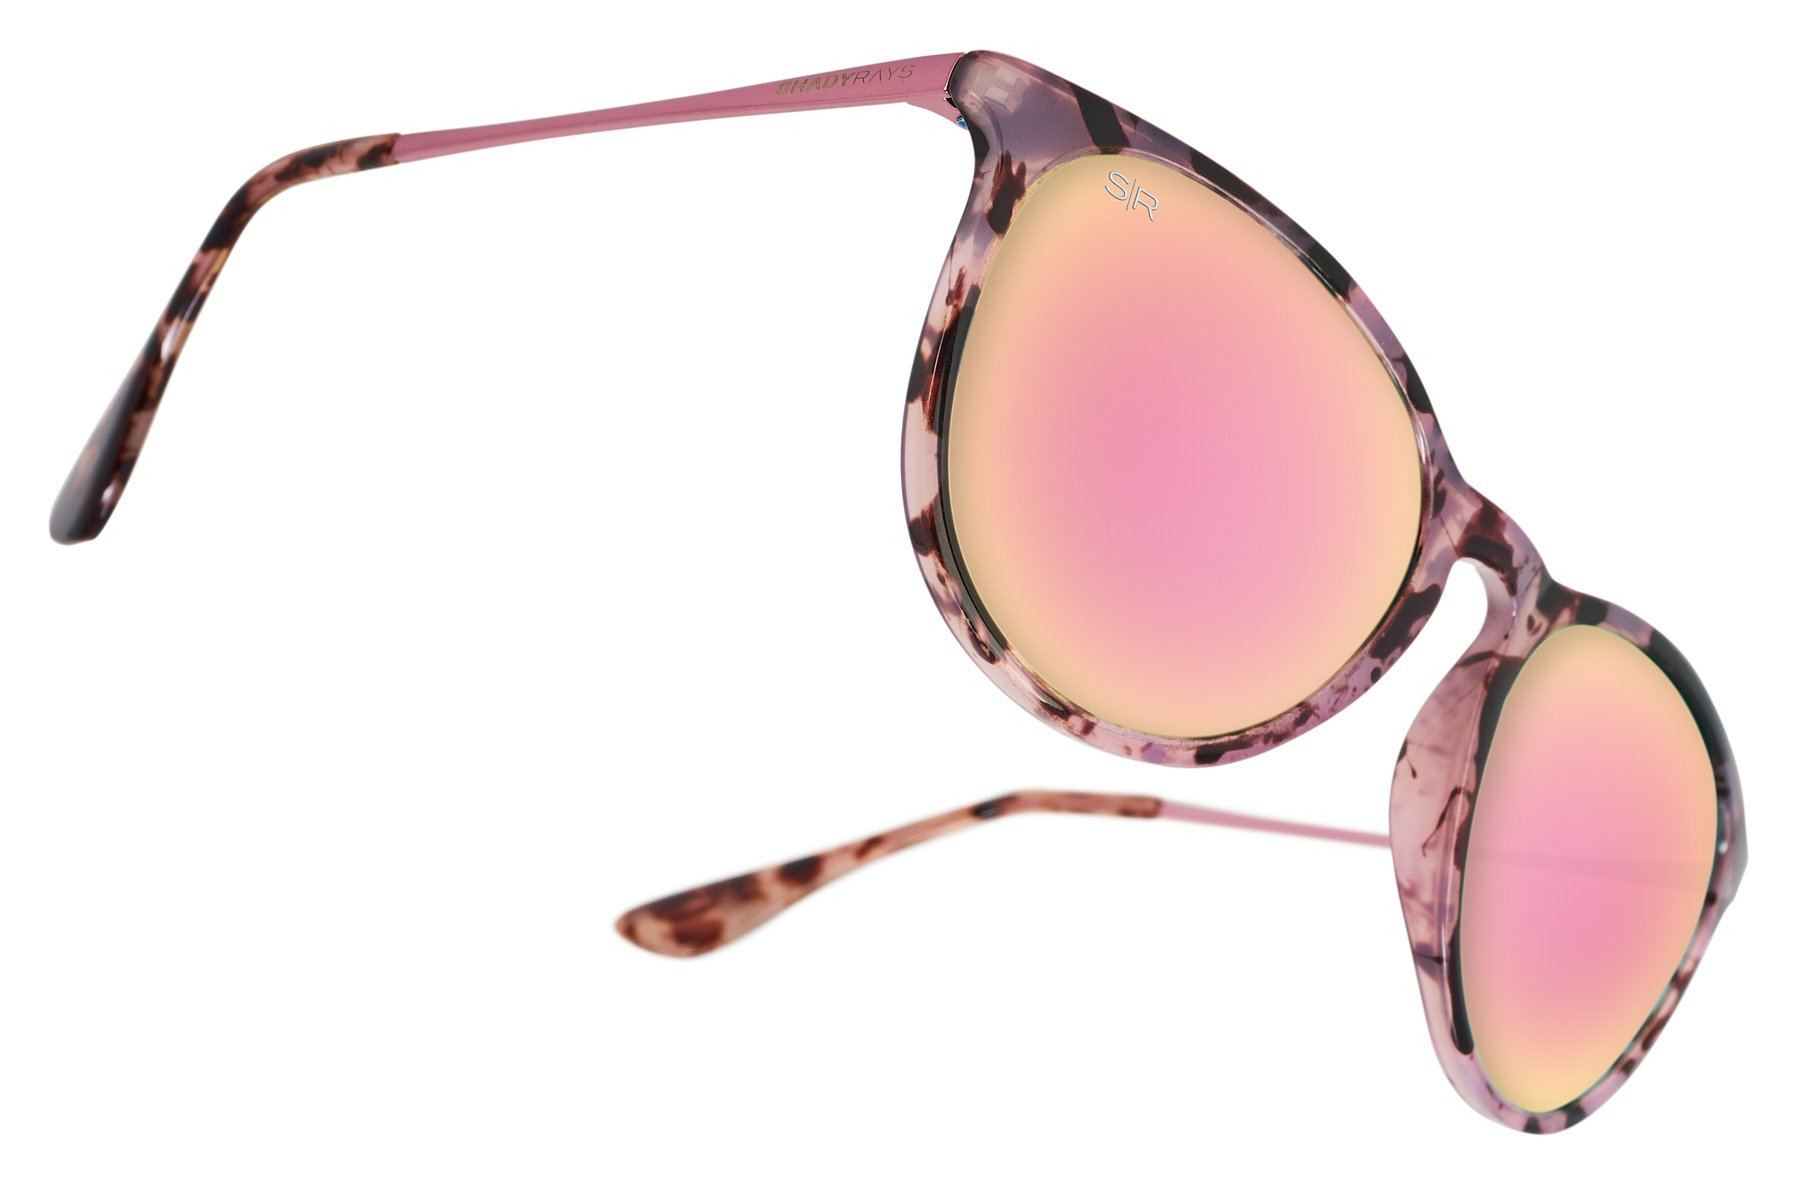 Allure - Pink Tortoise SR Pro Polarized Women's Sunglasses | Tortoise Women's Sunglasses | Christmas Gifts for Girlfriend | Gifts for Her | Presents